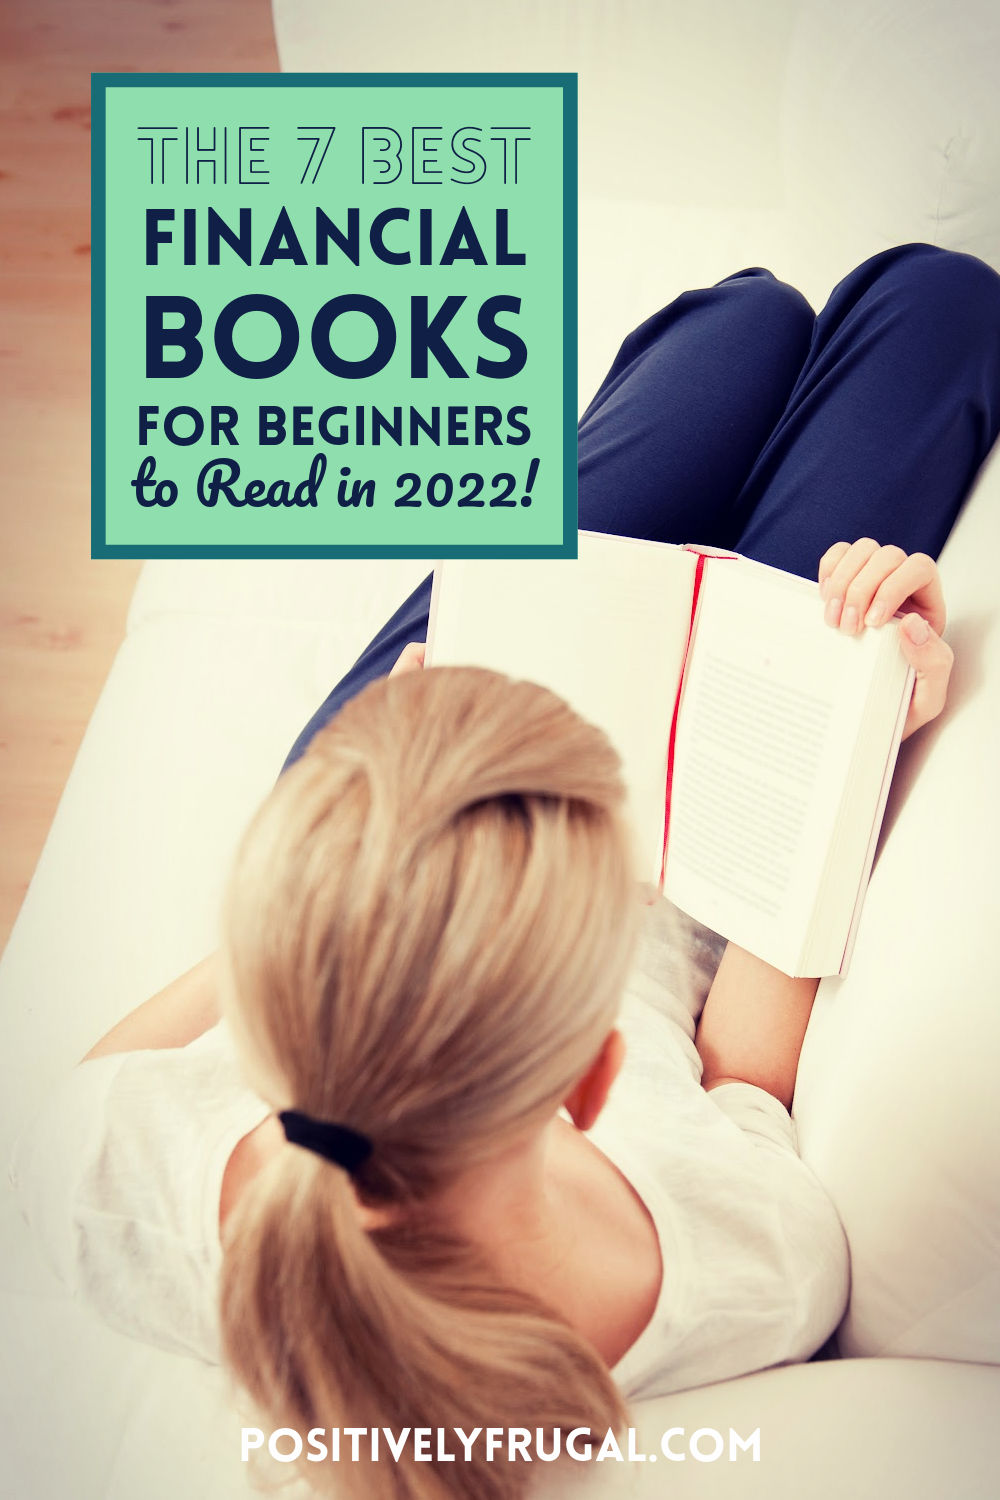 The 7 Best Financial Books for Beginners to Read in 2022 by PositivelyFrugal.com